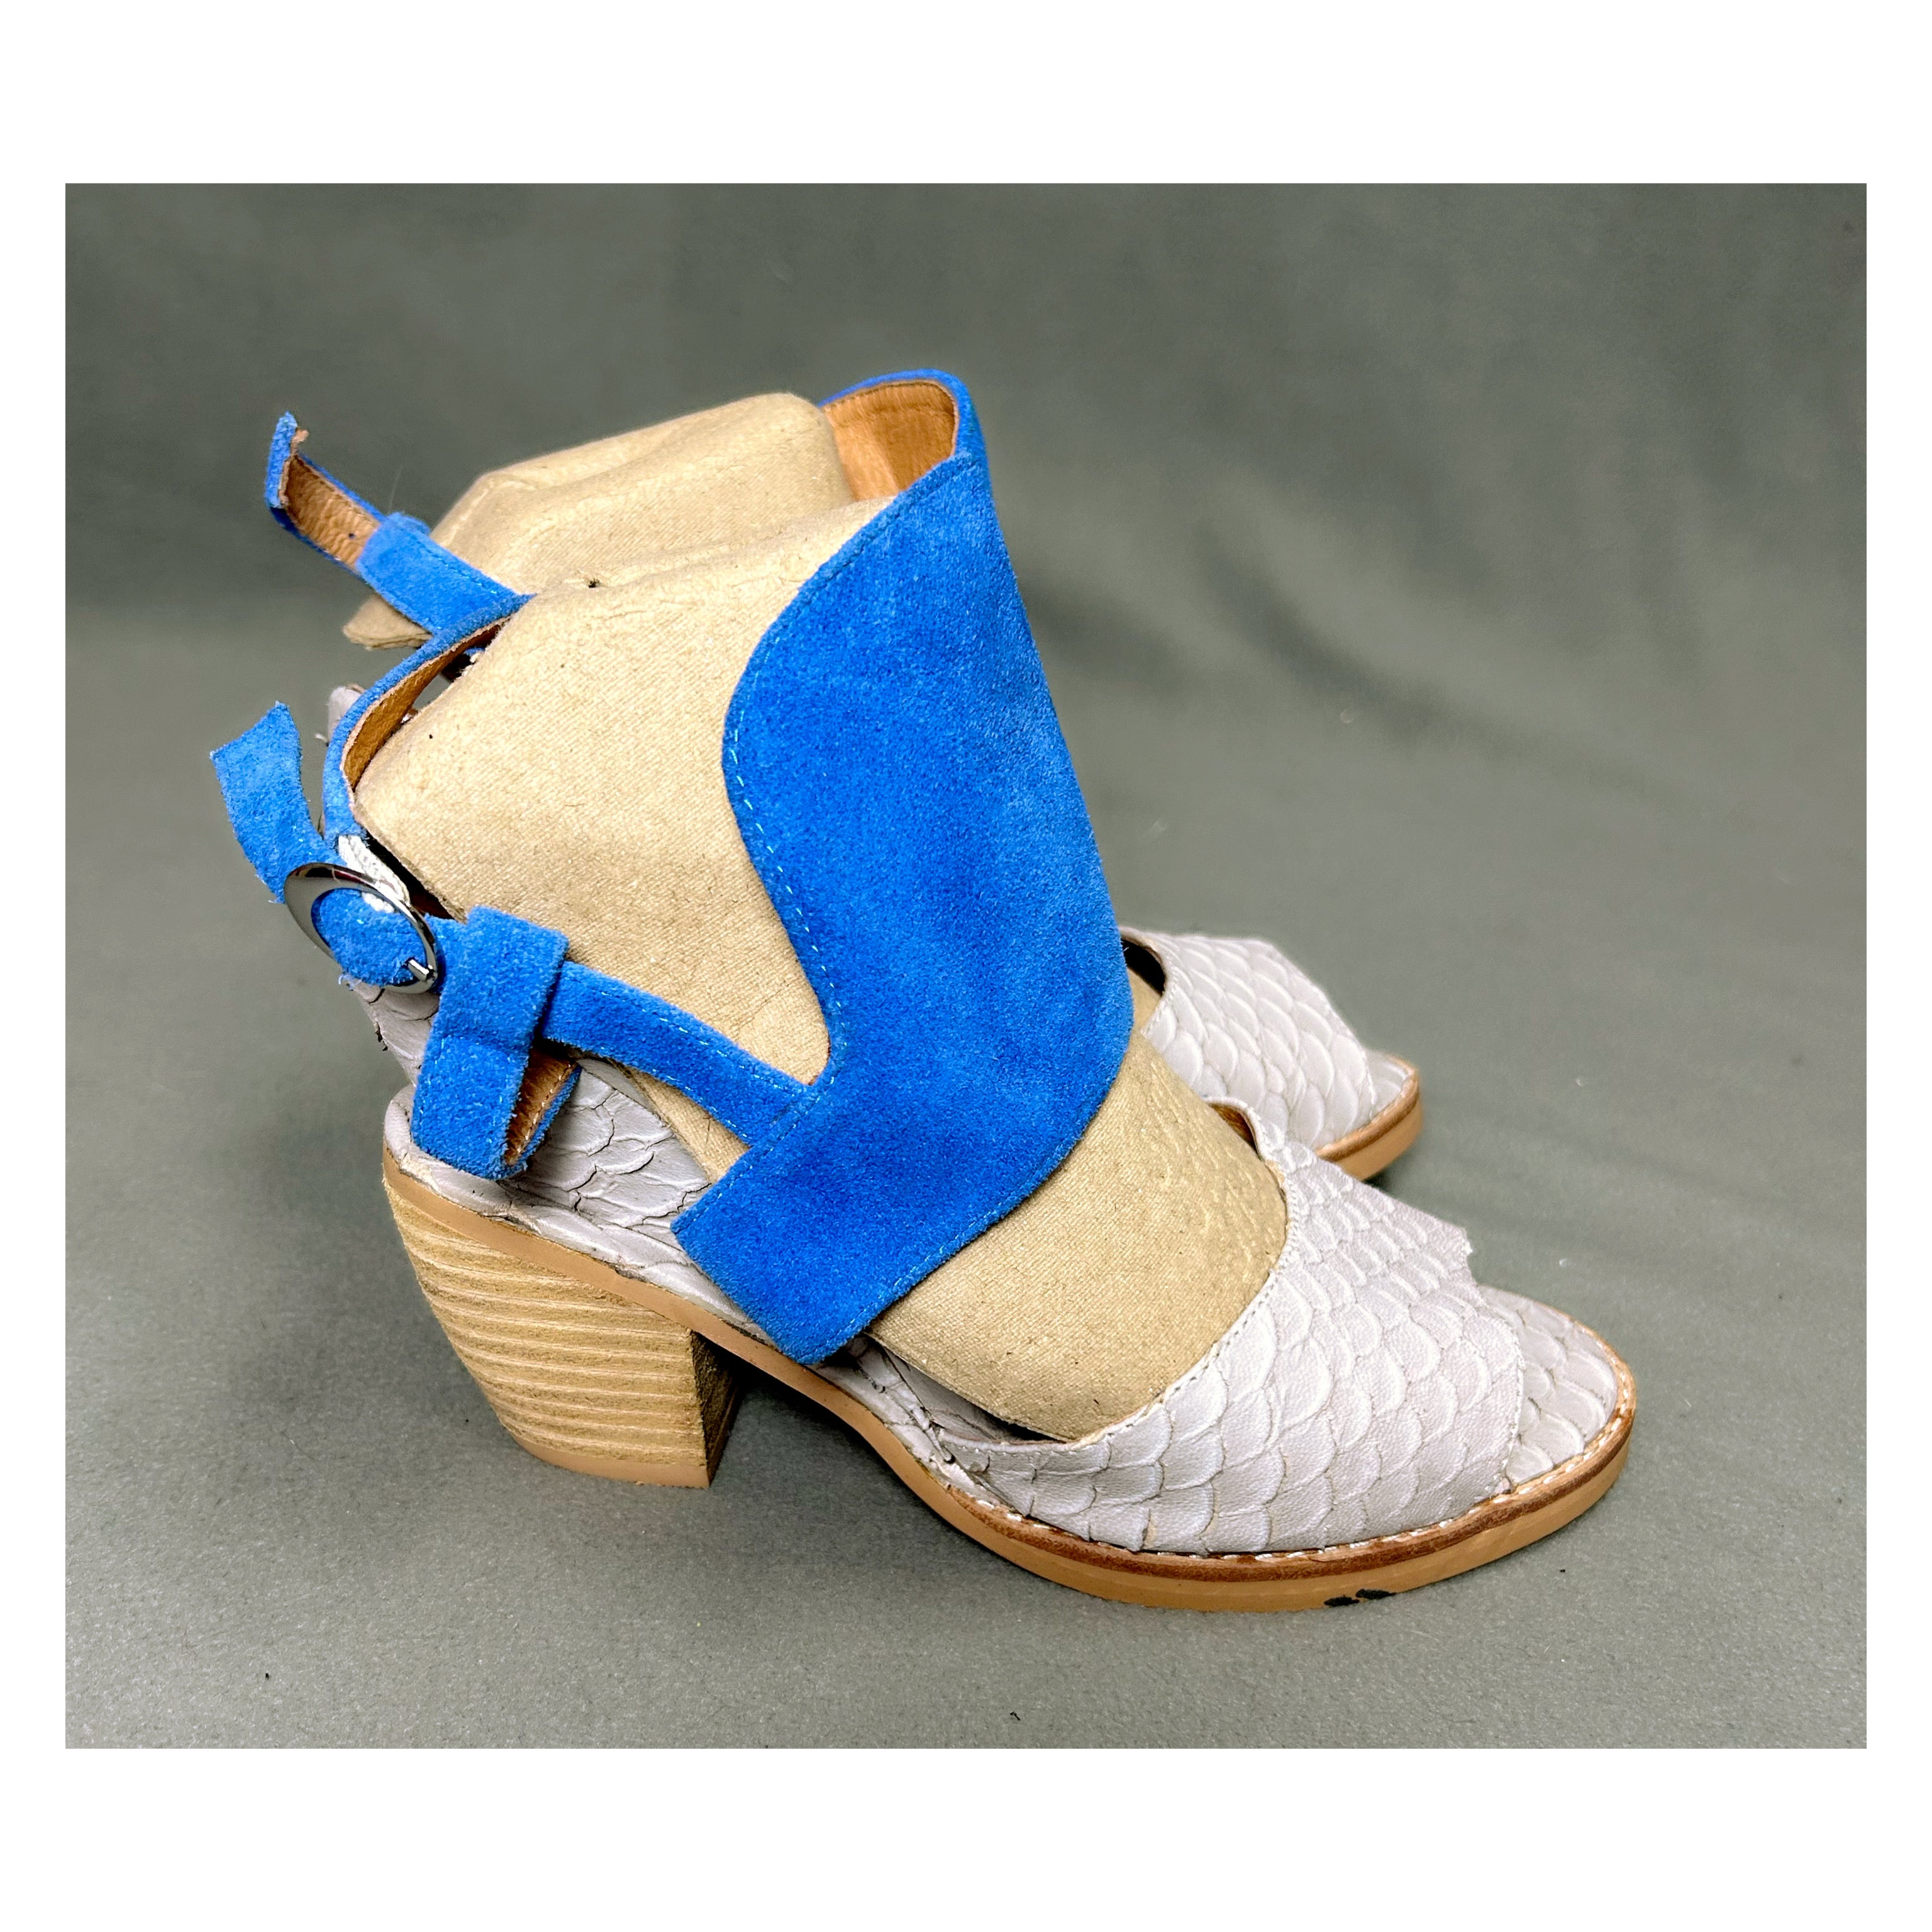 Jeffrey Campbell cobalt and pale gray shoes, size 8, BRAND NEW!